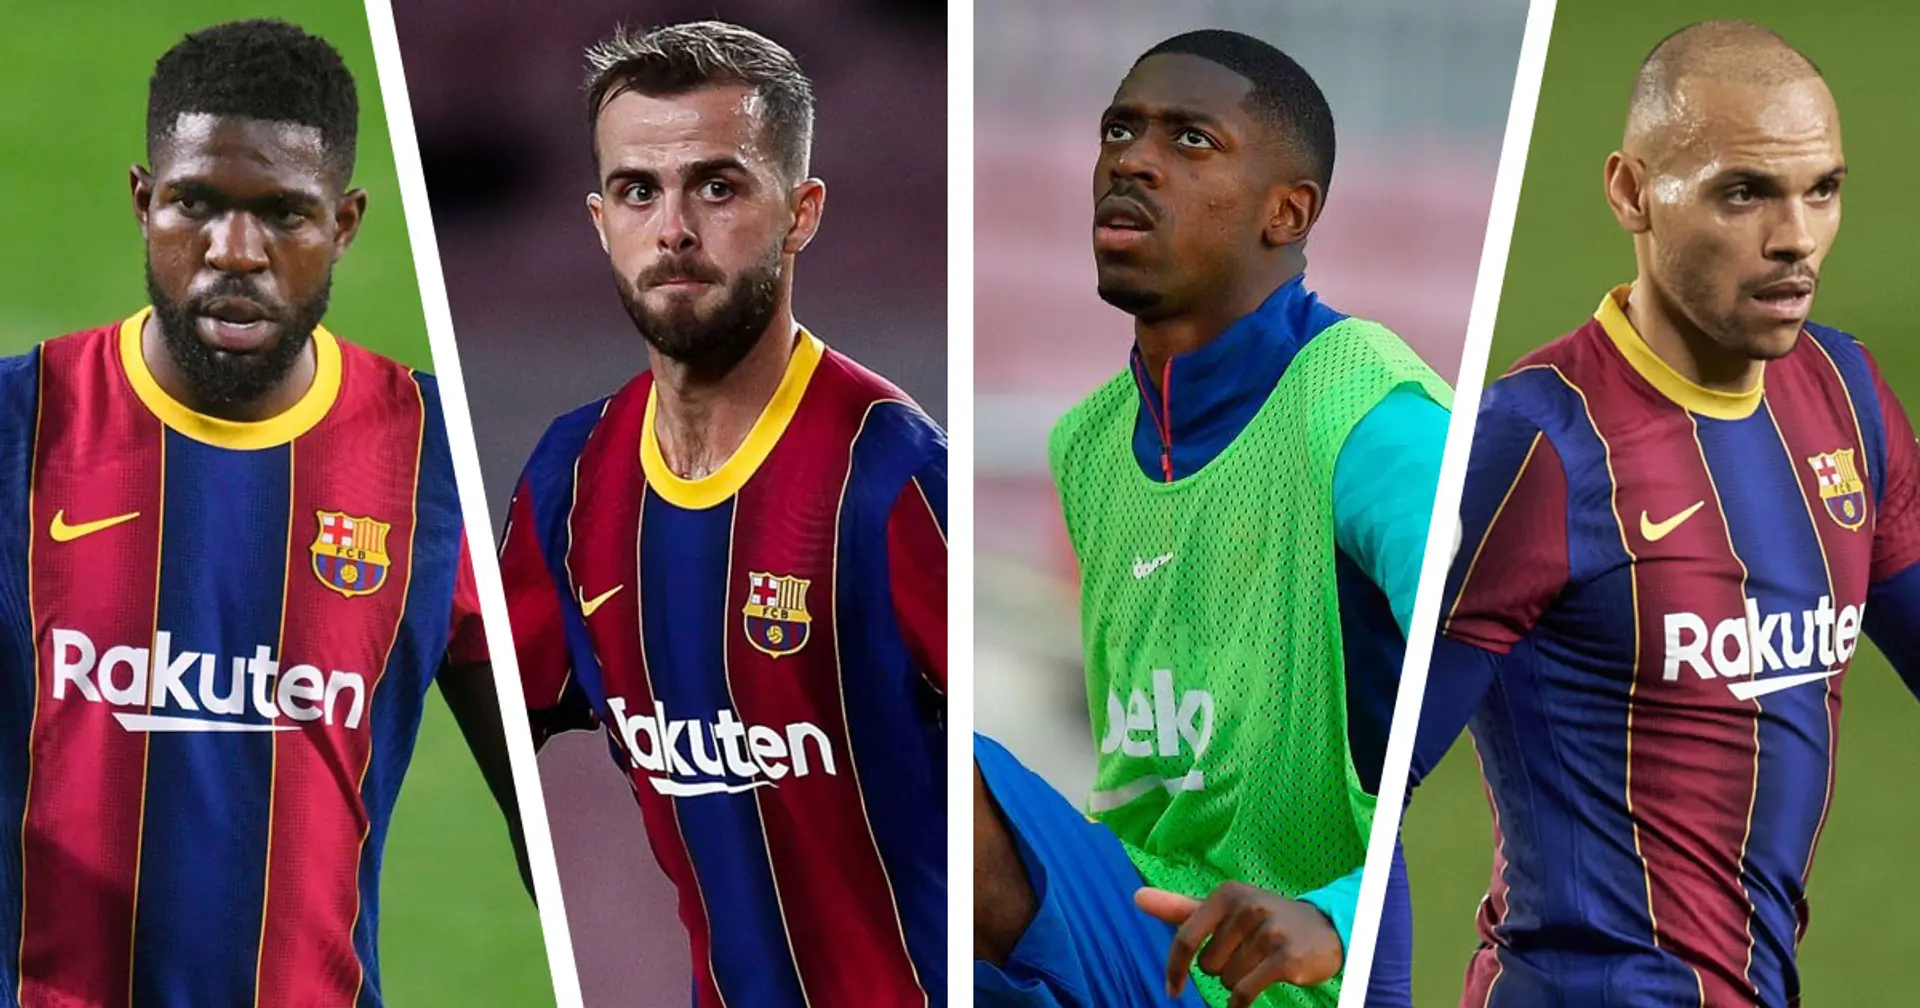 Barca pick 6 players to sell first, Dembele and Roberto next in line (reliability: 4 stars)